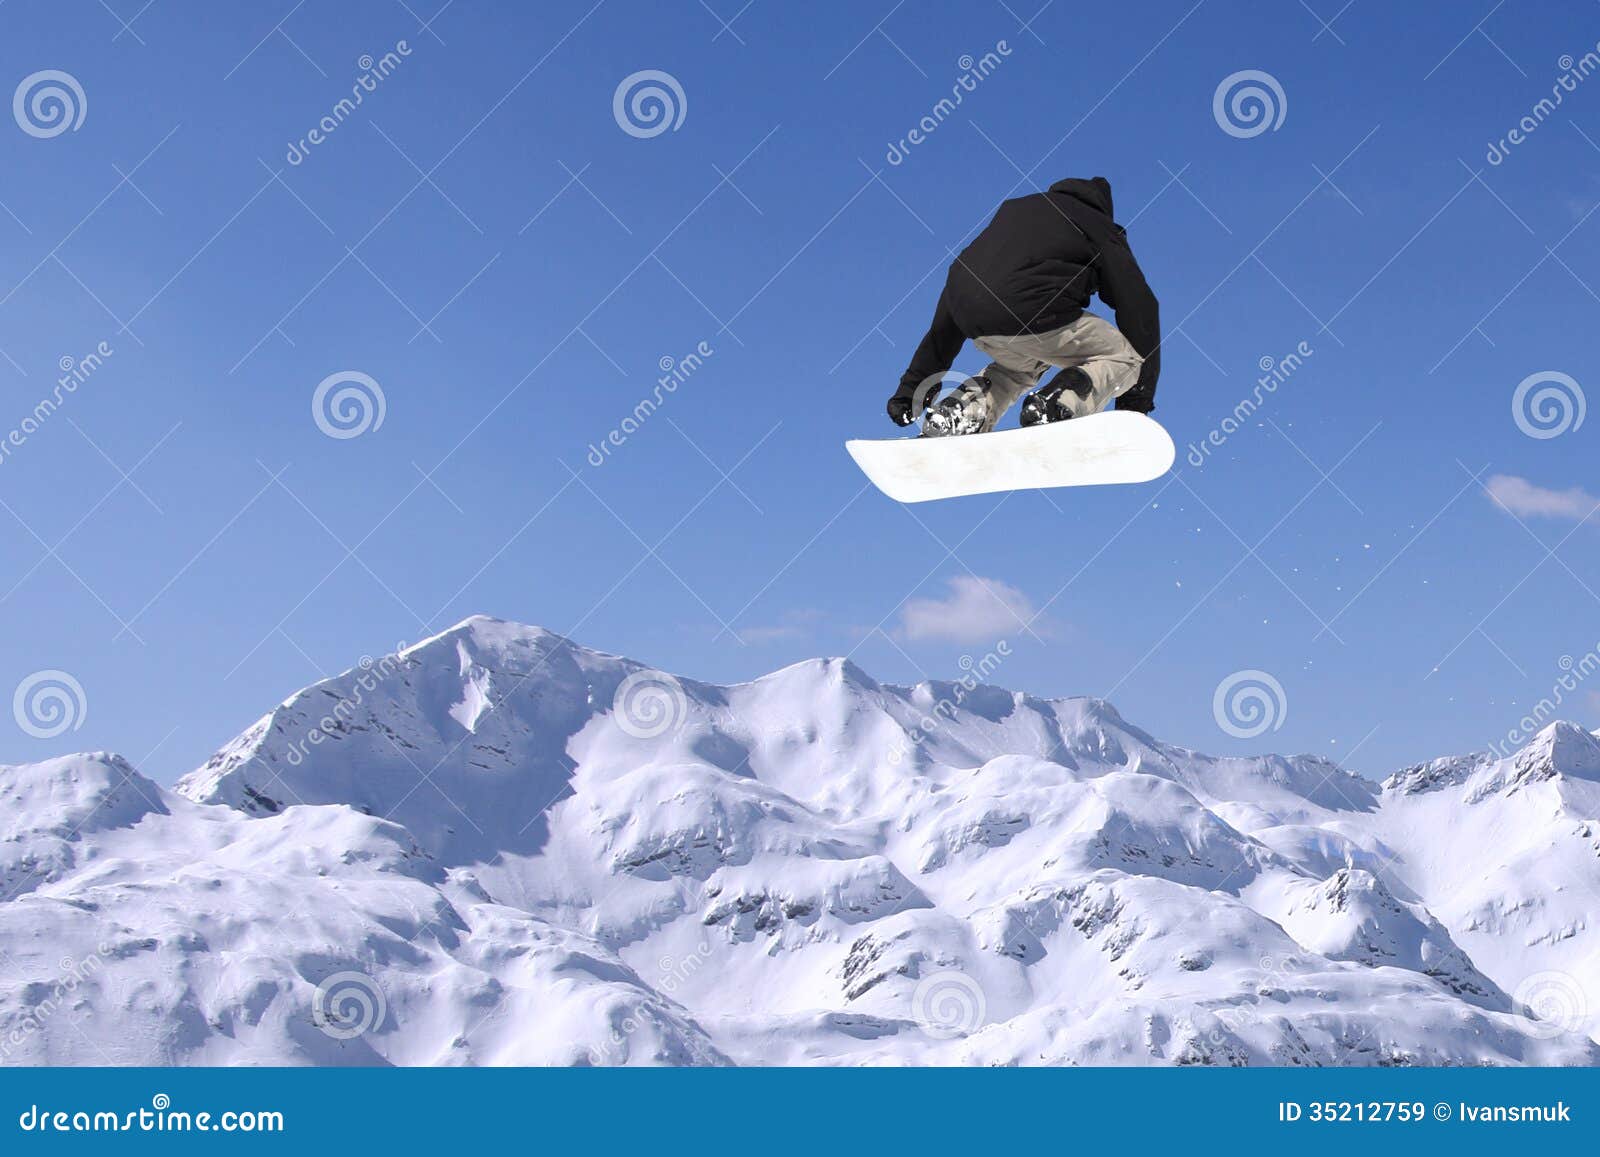 Snowboarder jumping. Snowboarder at jump inhigh mountains at sunny day